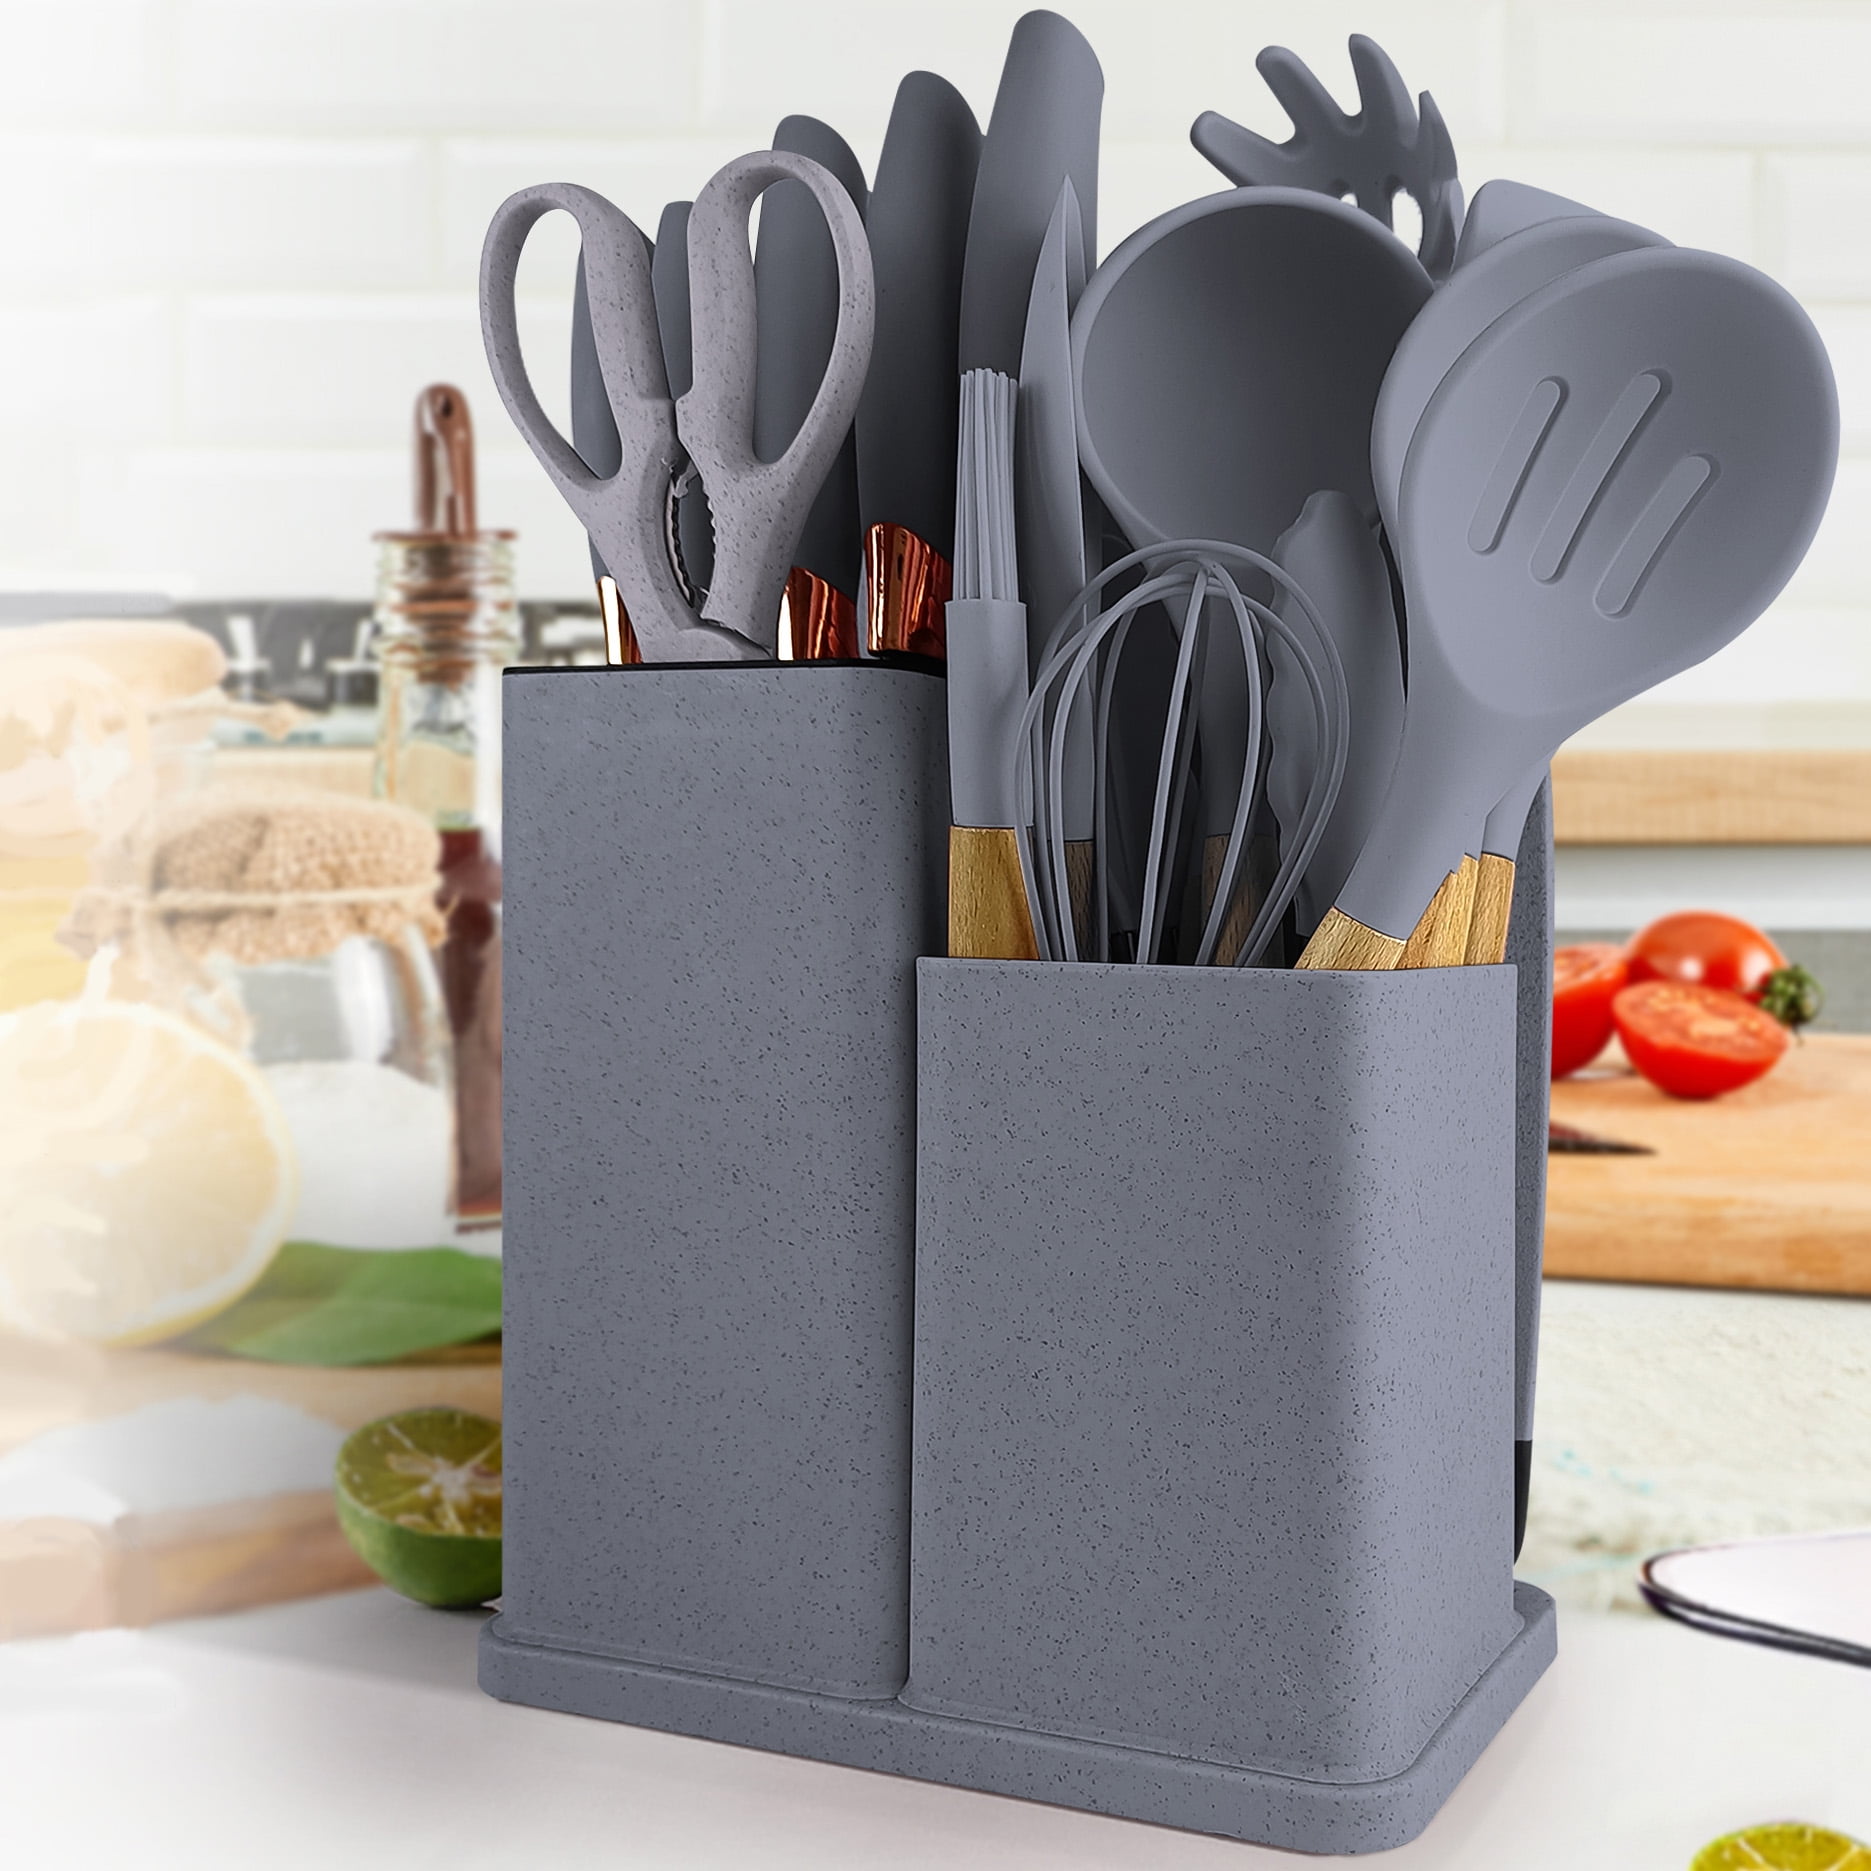 Silicone Cooking Kitchen Utensils Set with Holder - 12 Pcs – My Home Shop